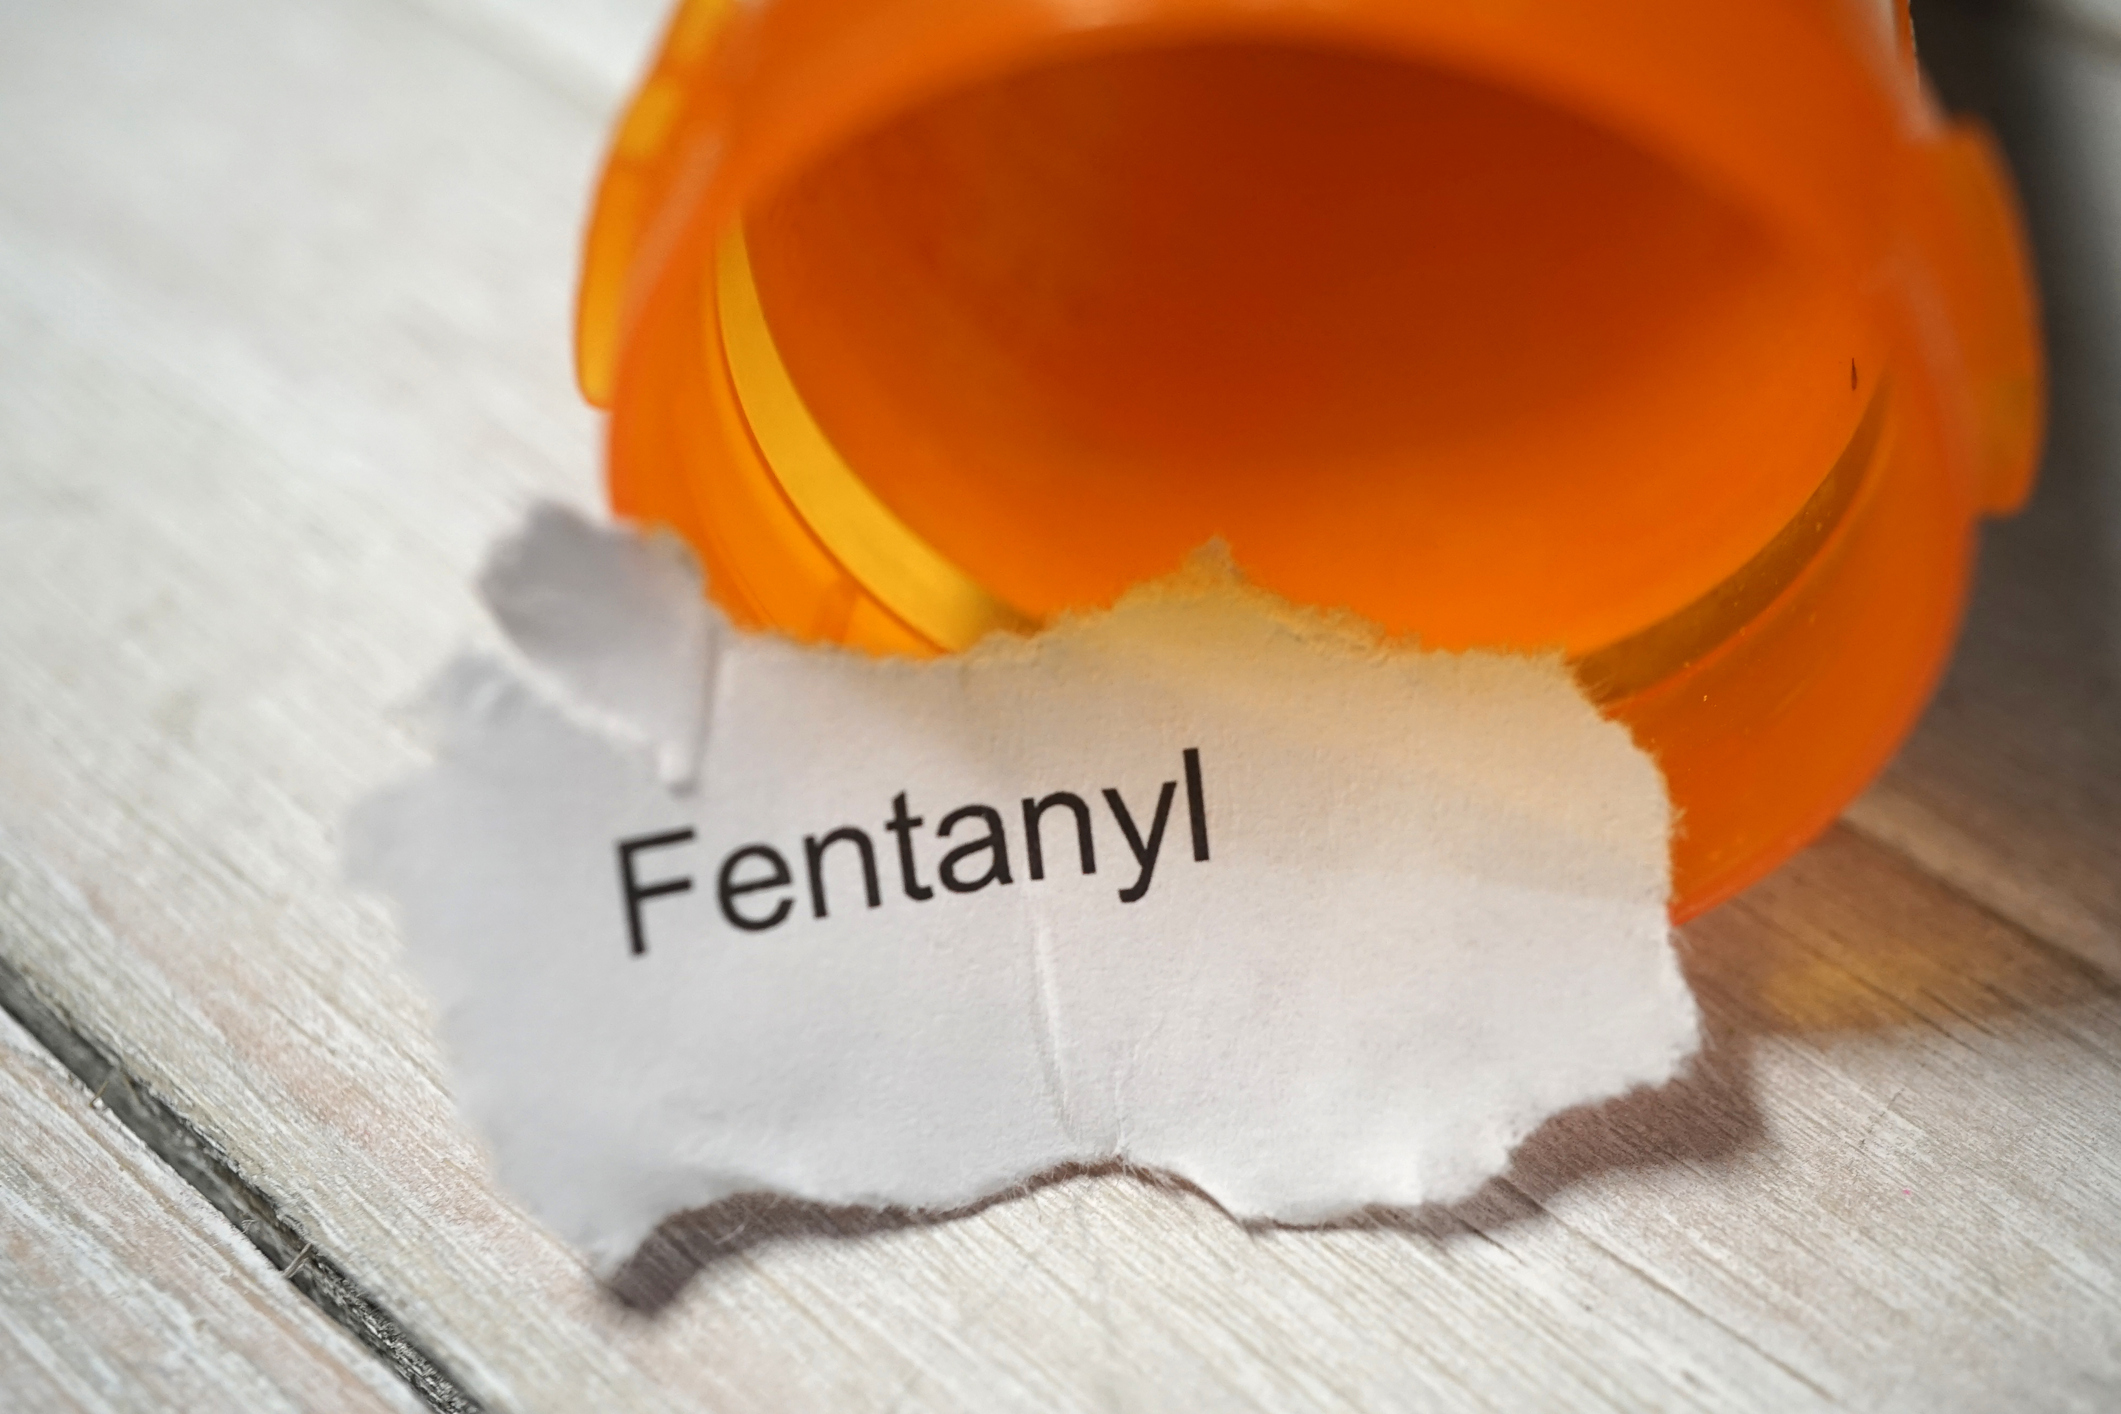 Fentanyl Overdoses Are Increasing Among Teens. What Can Parents Do?